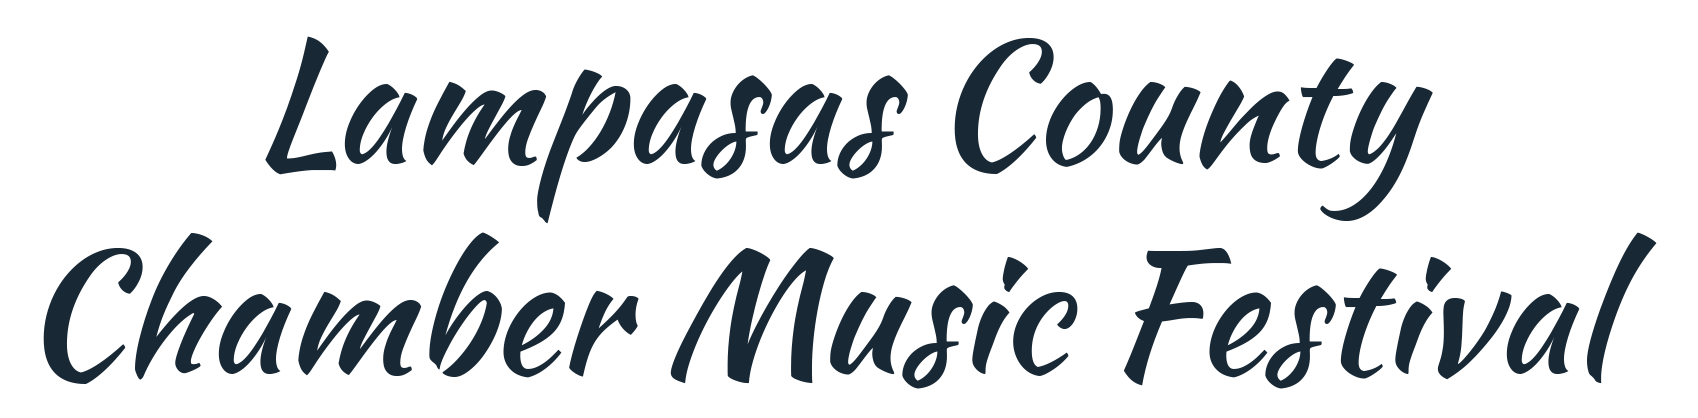 Lampasas County Chamber Music Festival top of homepage